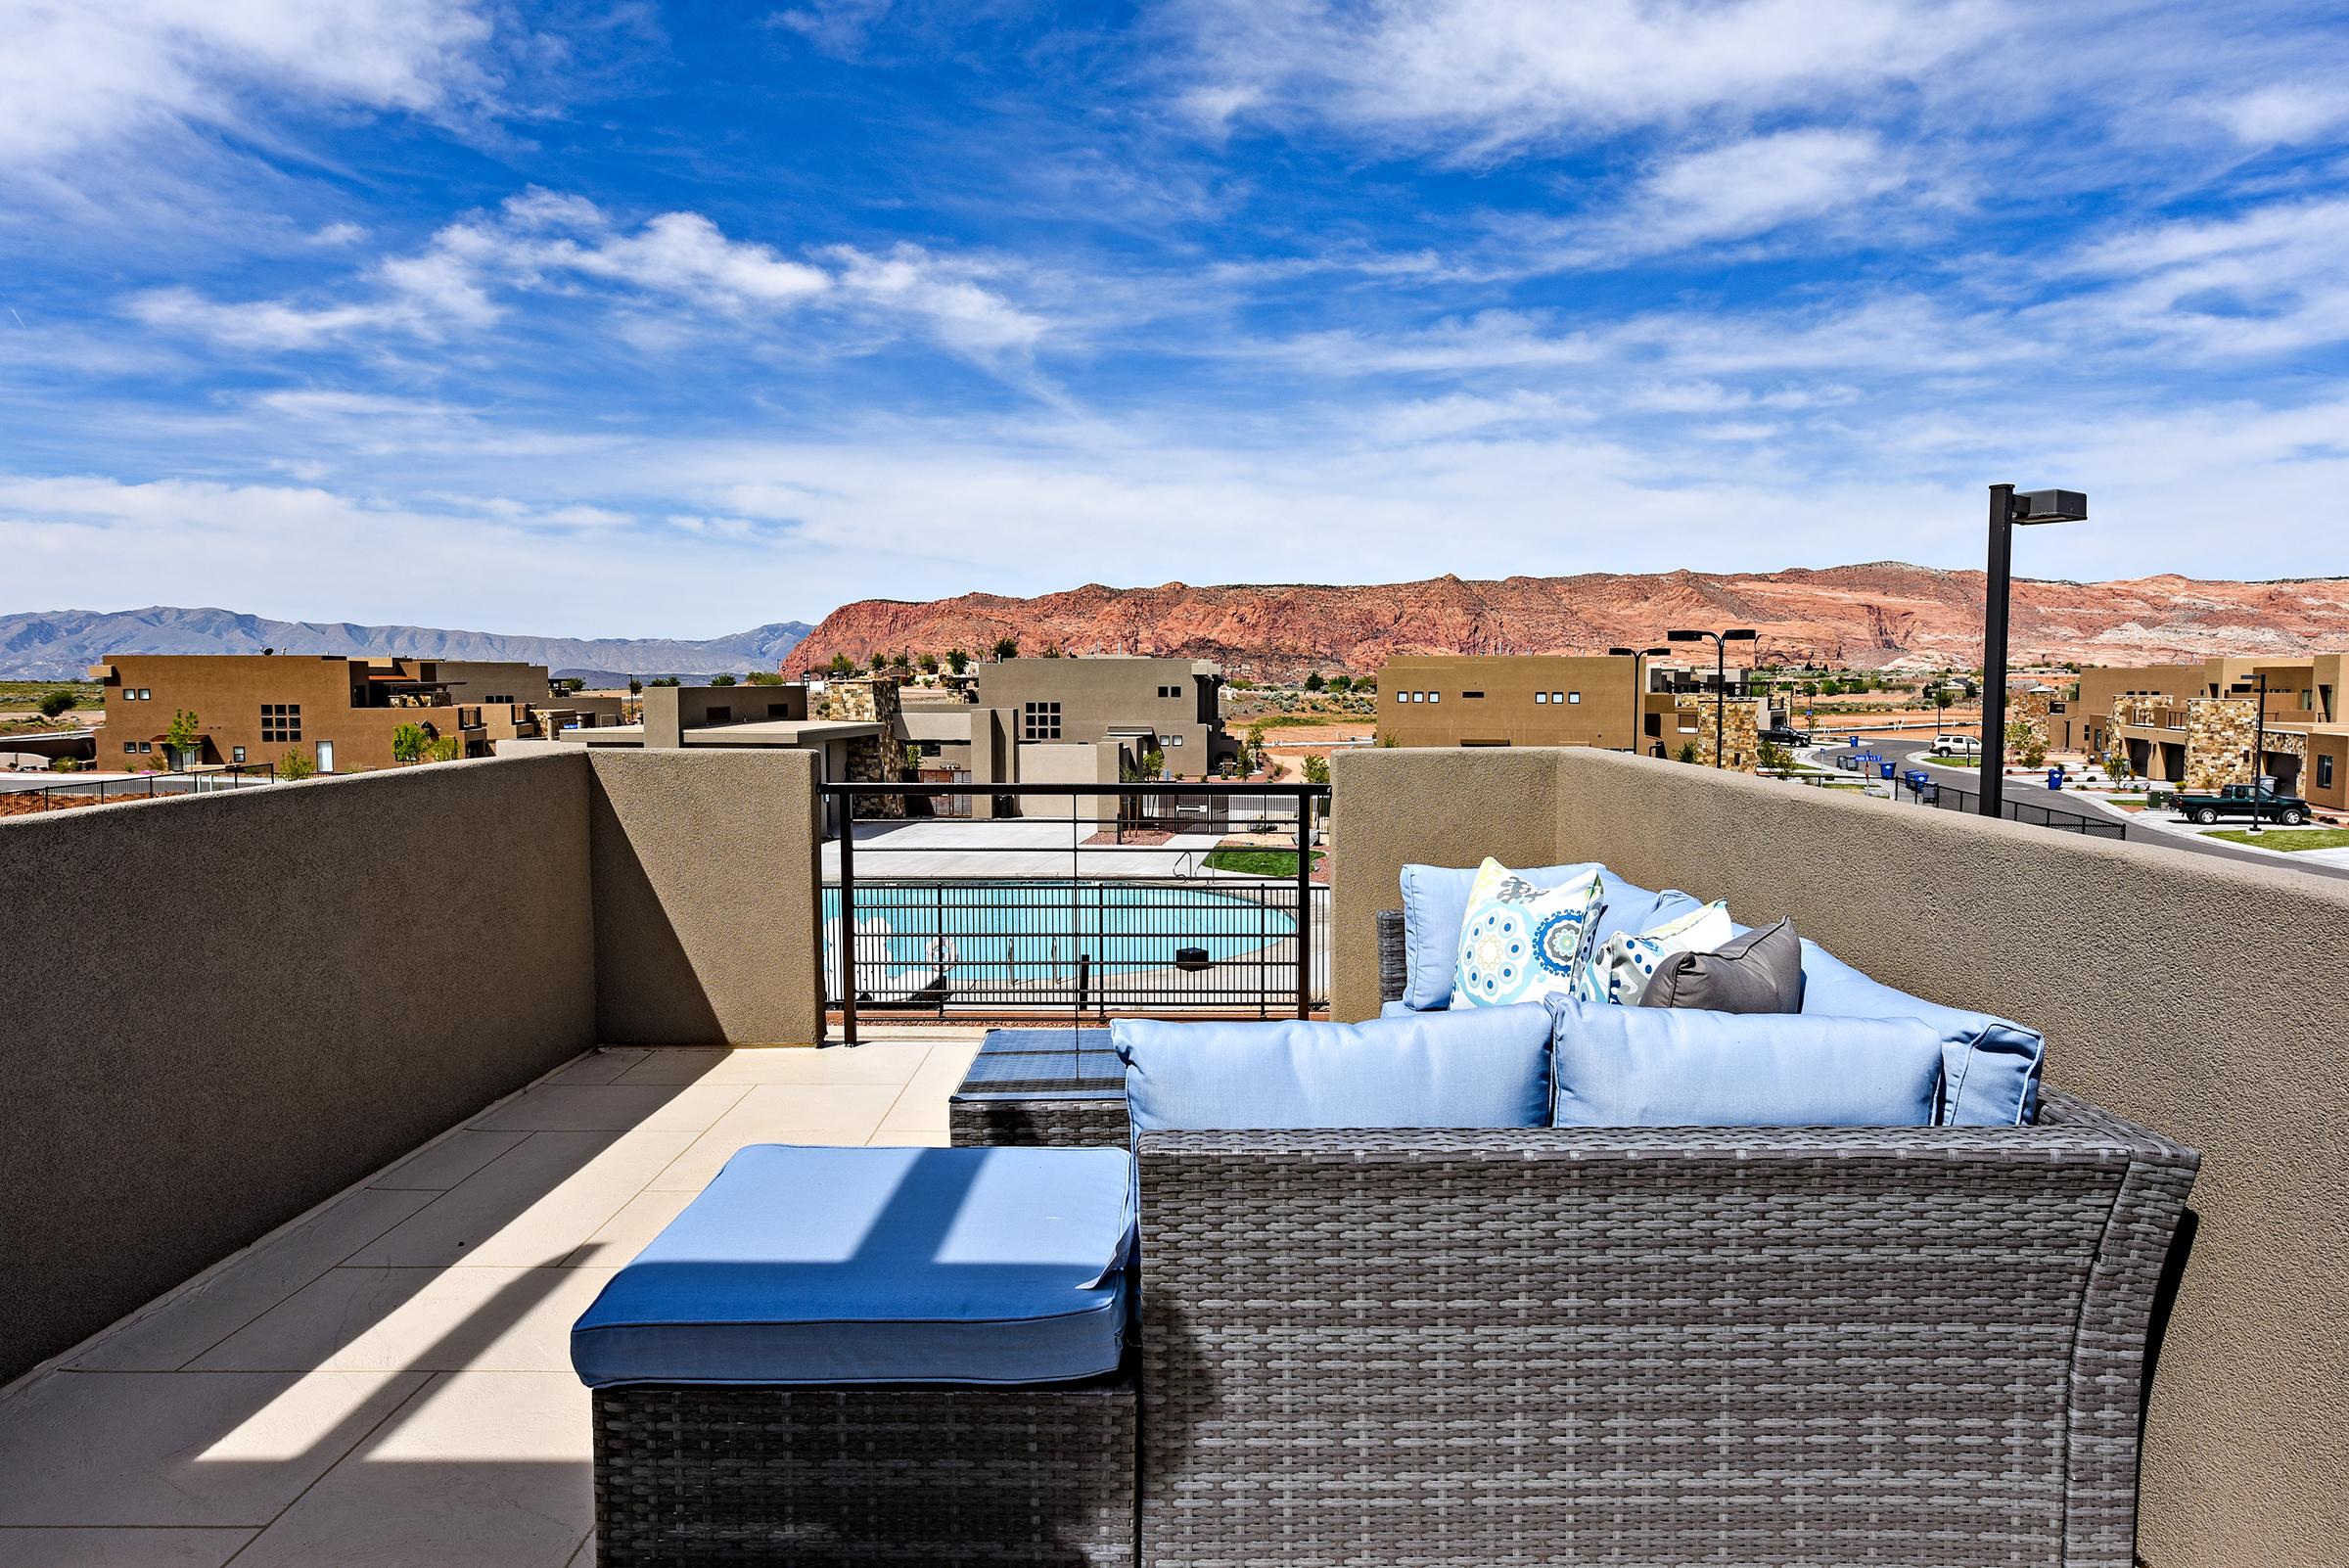 The Patio Deck is a spacious area to entertain guests while enjoying the beautiful surrounding landscapes of Snow Canyon State Park.